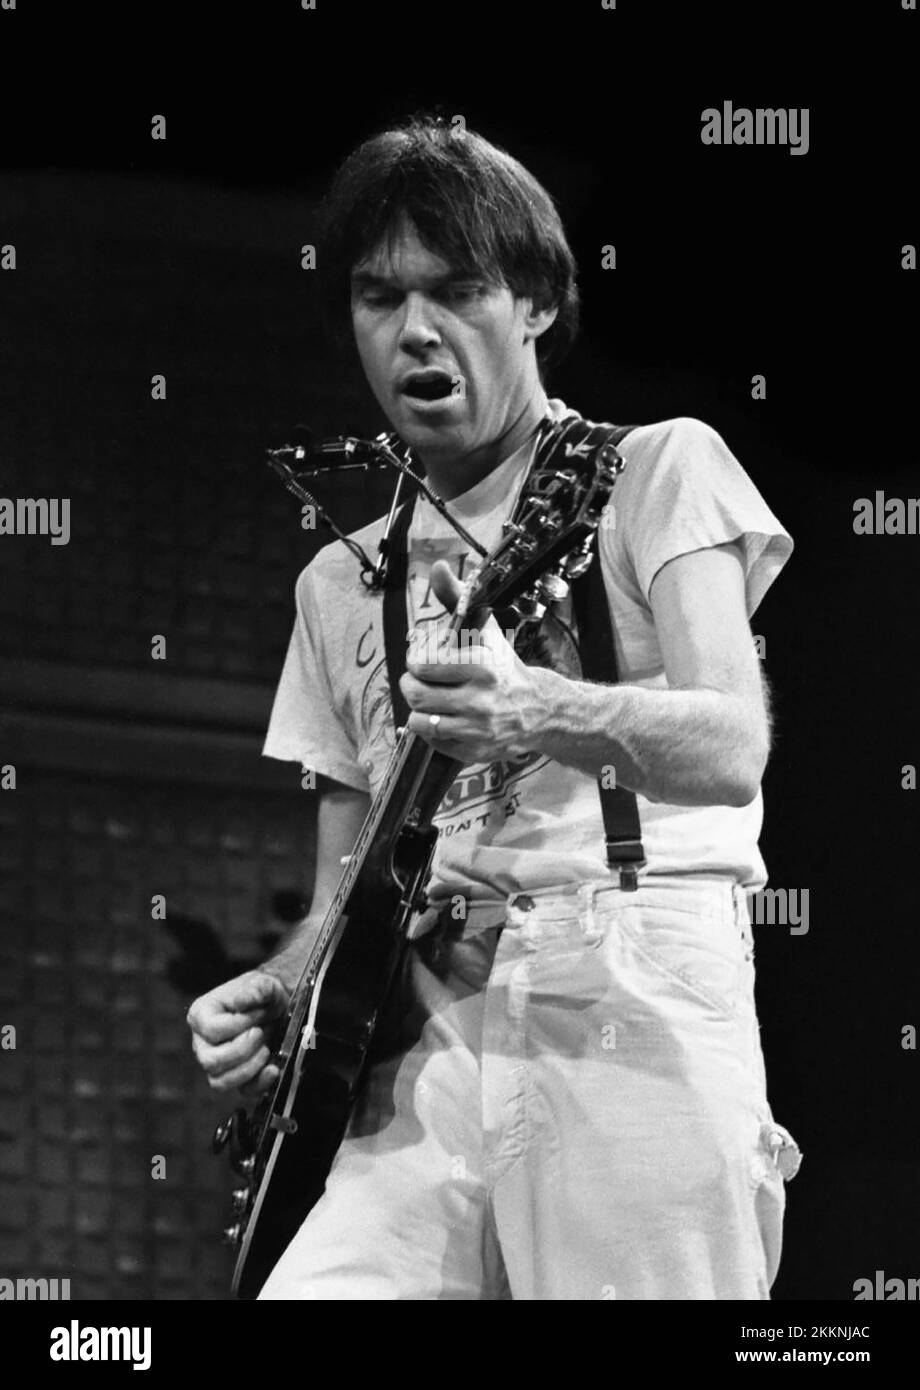 Neil Young with Crazy Horse in concert during the Rust Never Sleeps Tour at the Dane County Coliseum in Madison Wisconsin in 1978. Stock Photo